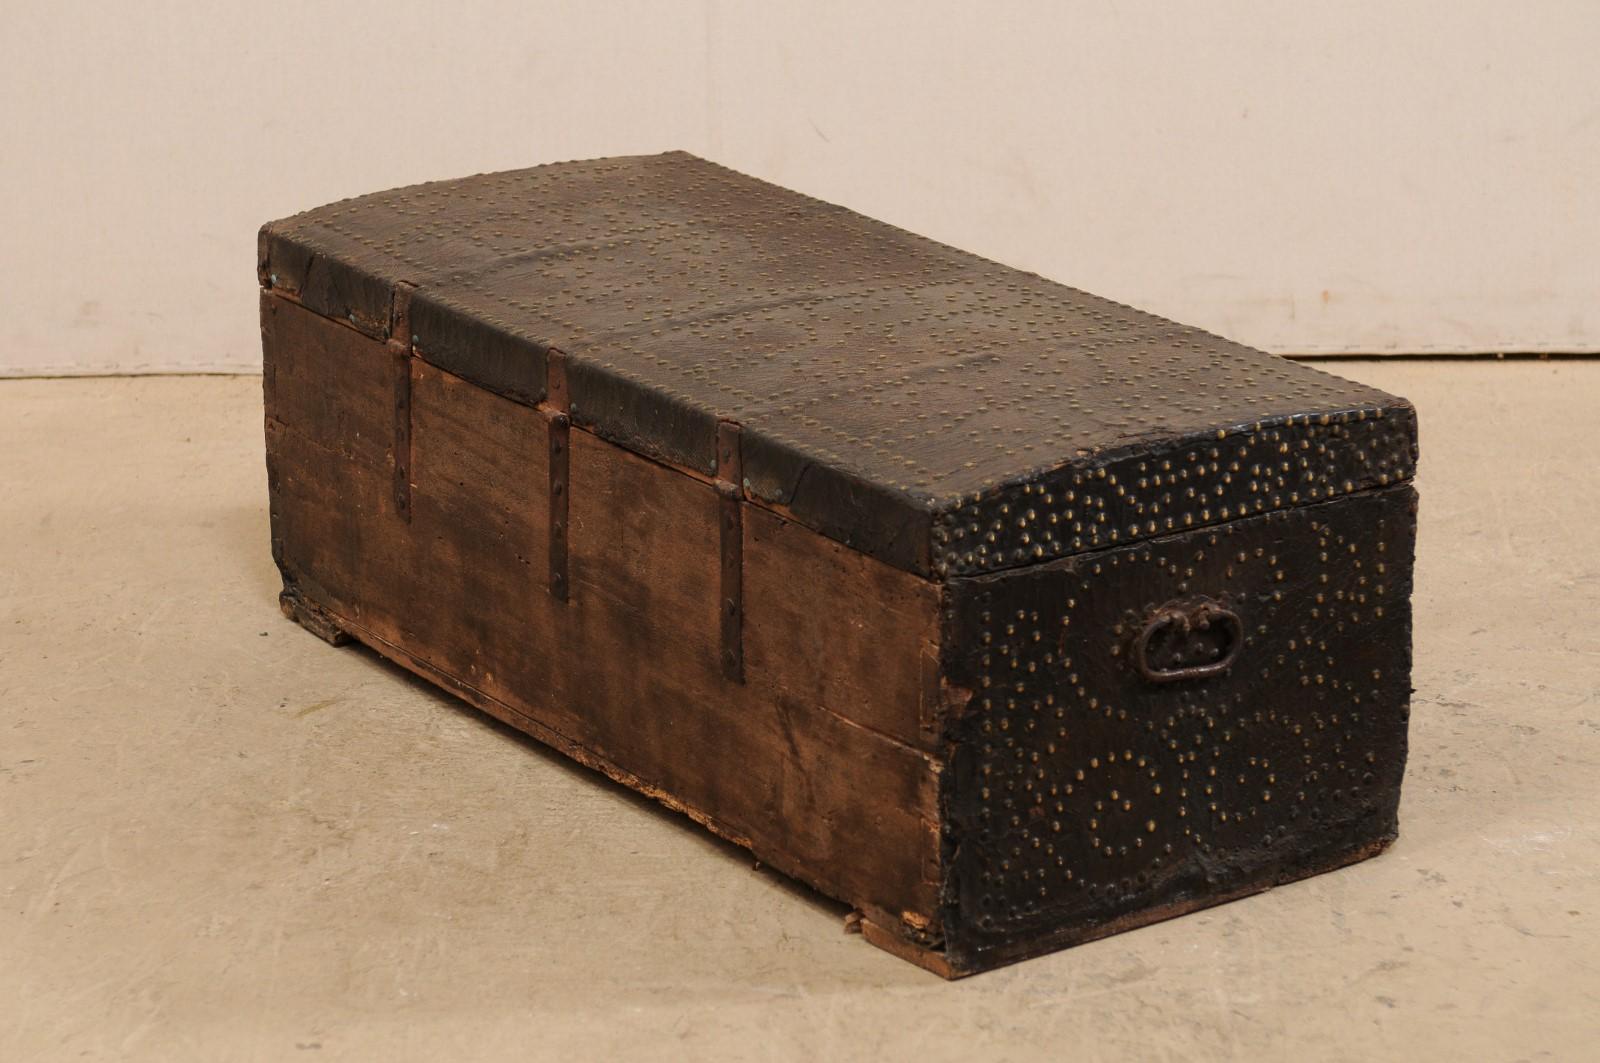 Spanish Baroque Leather-Wrapped Coffer Adorn with Brass Accents, 18th Century For Sale 7